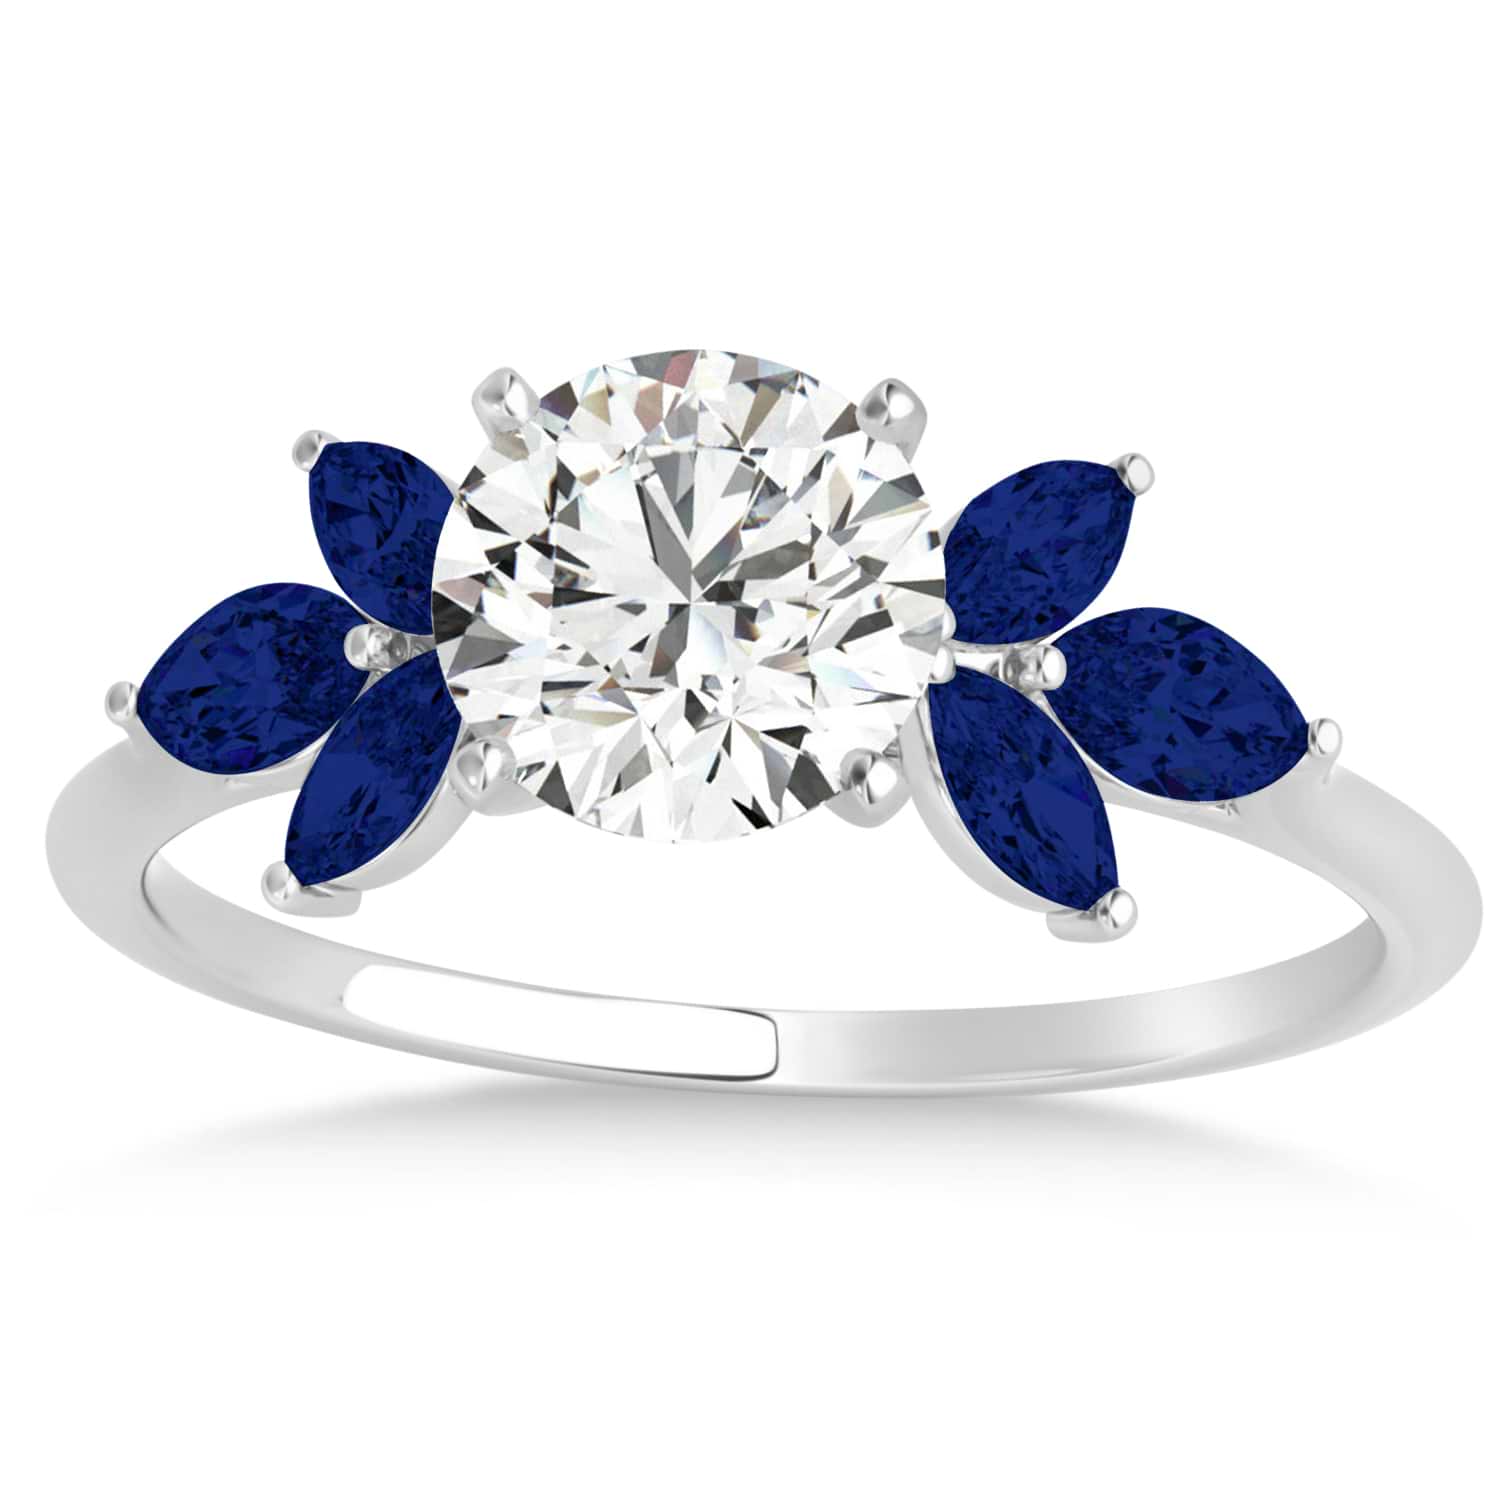 14kt Yellow Gold Flower Ring with Blue Montana Sapphire